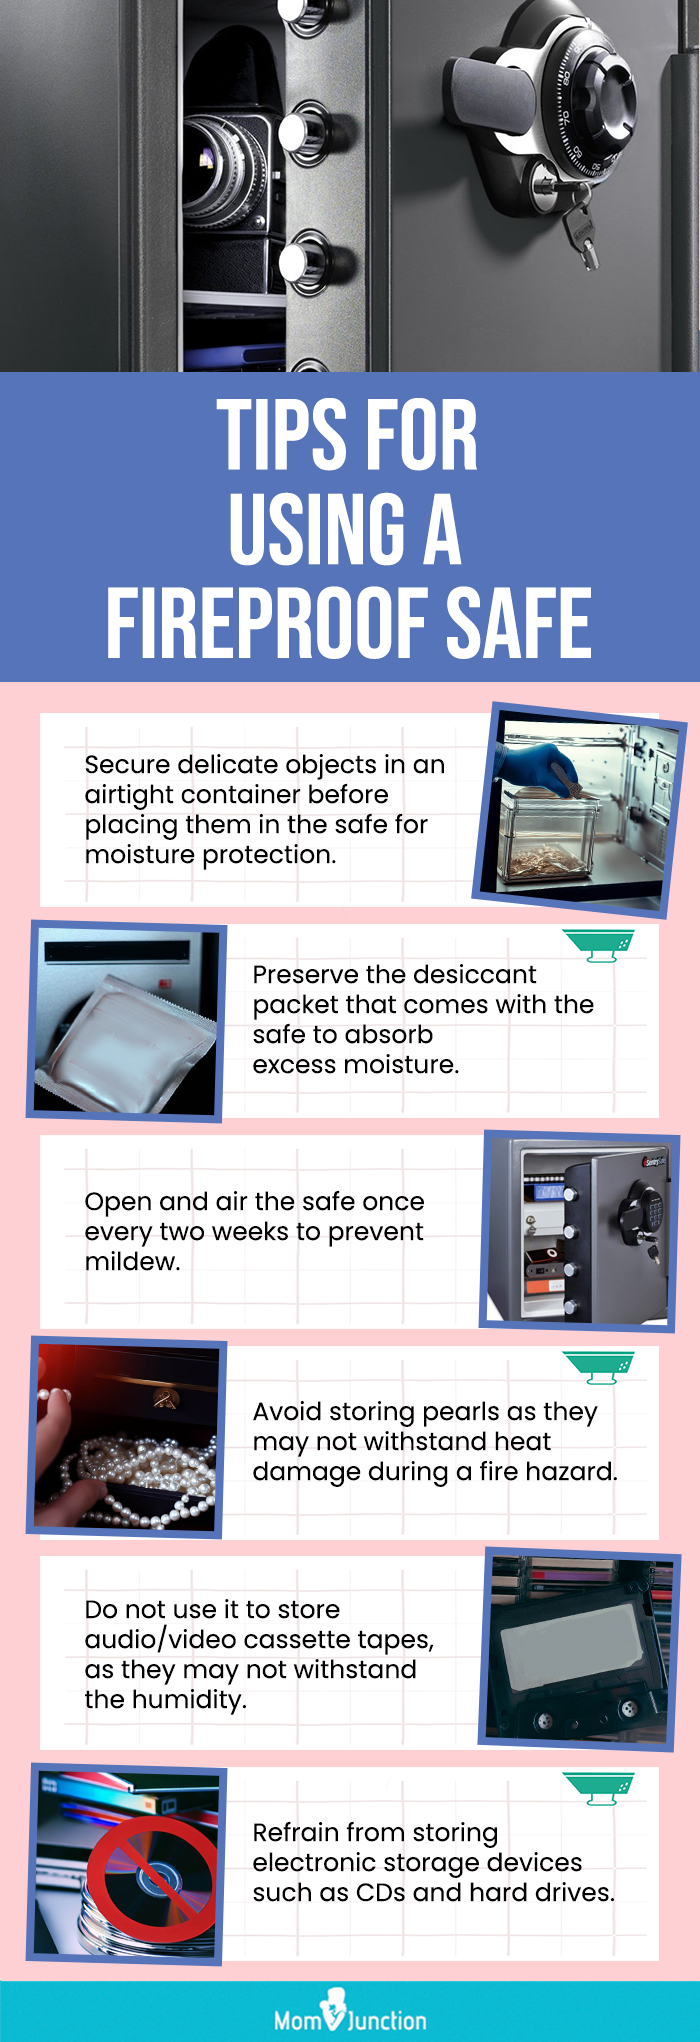 Tips For Using A Fireproof Safe(infographic)